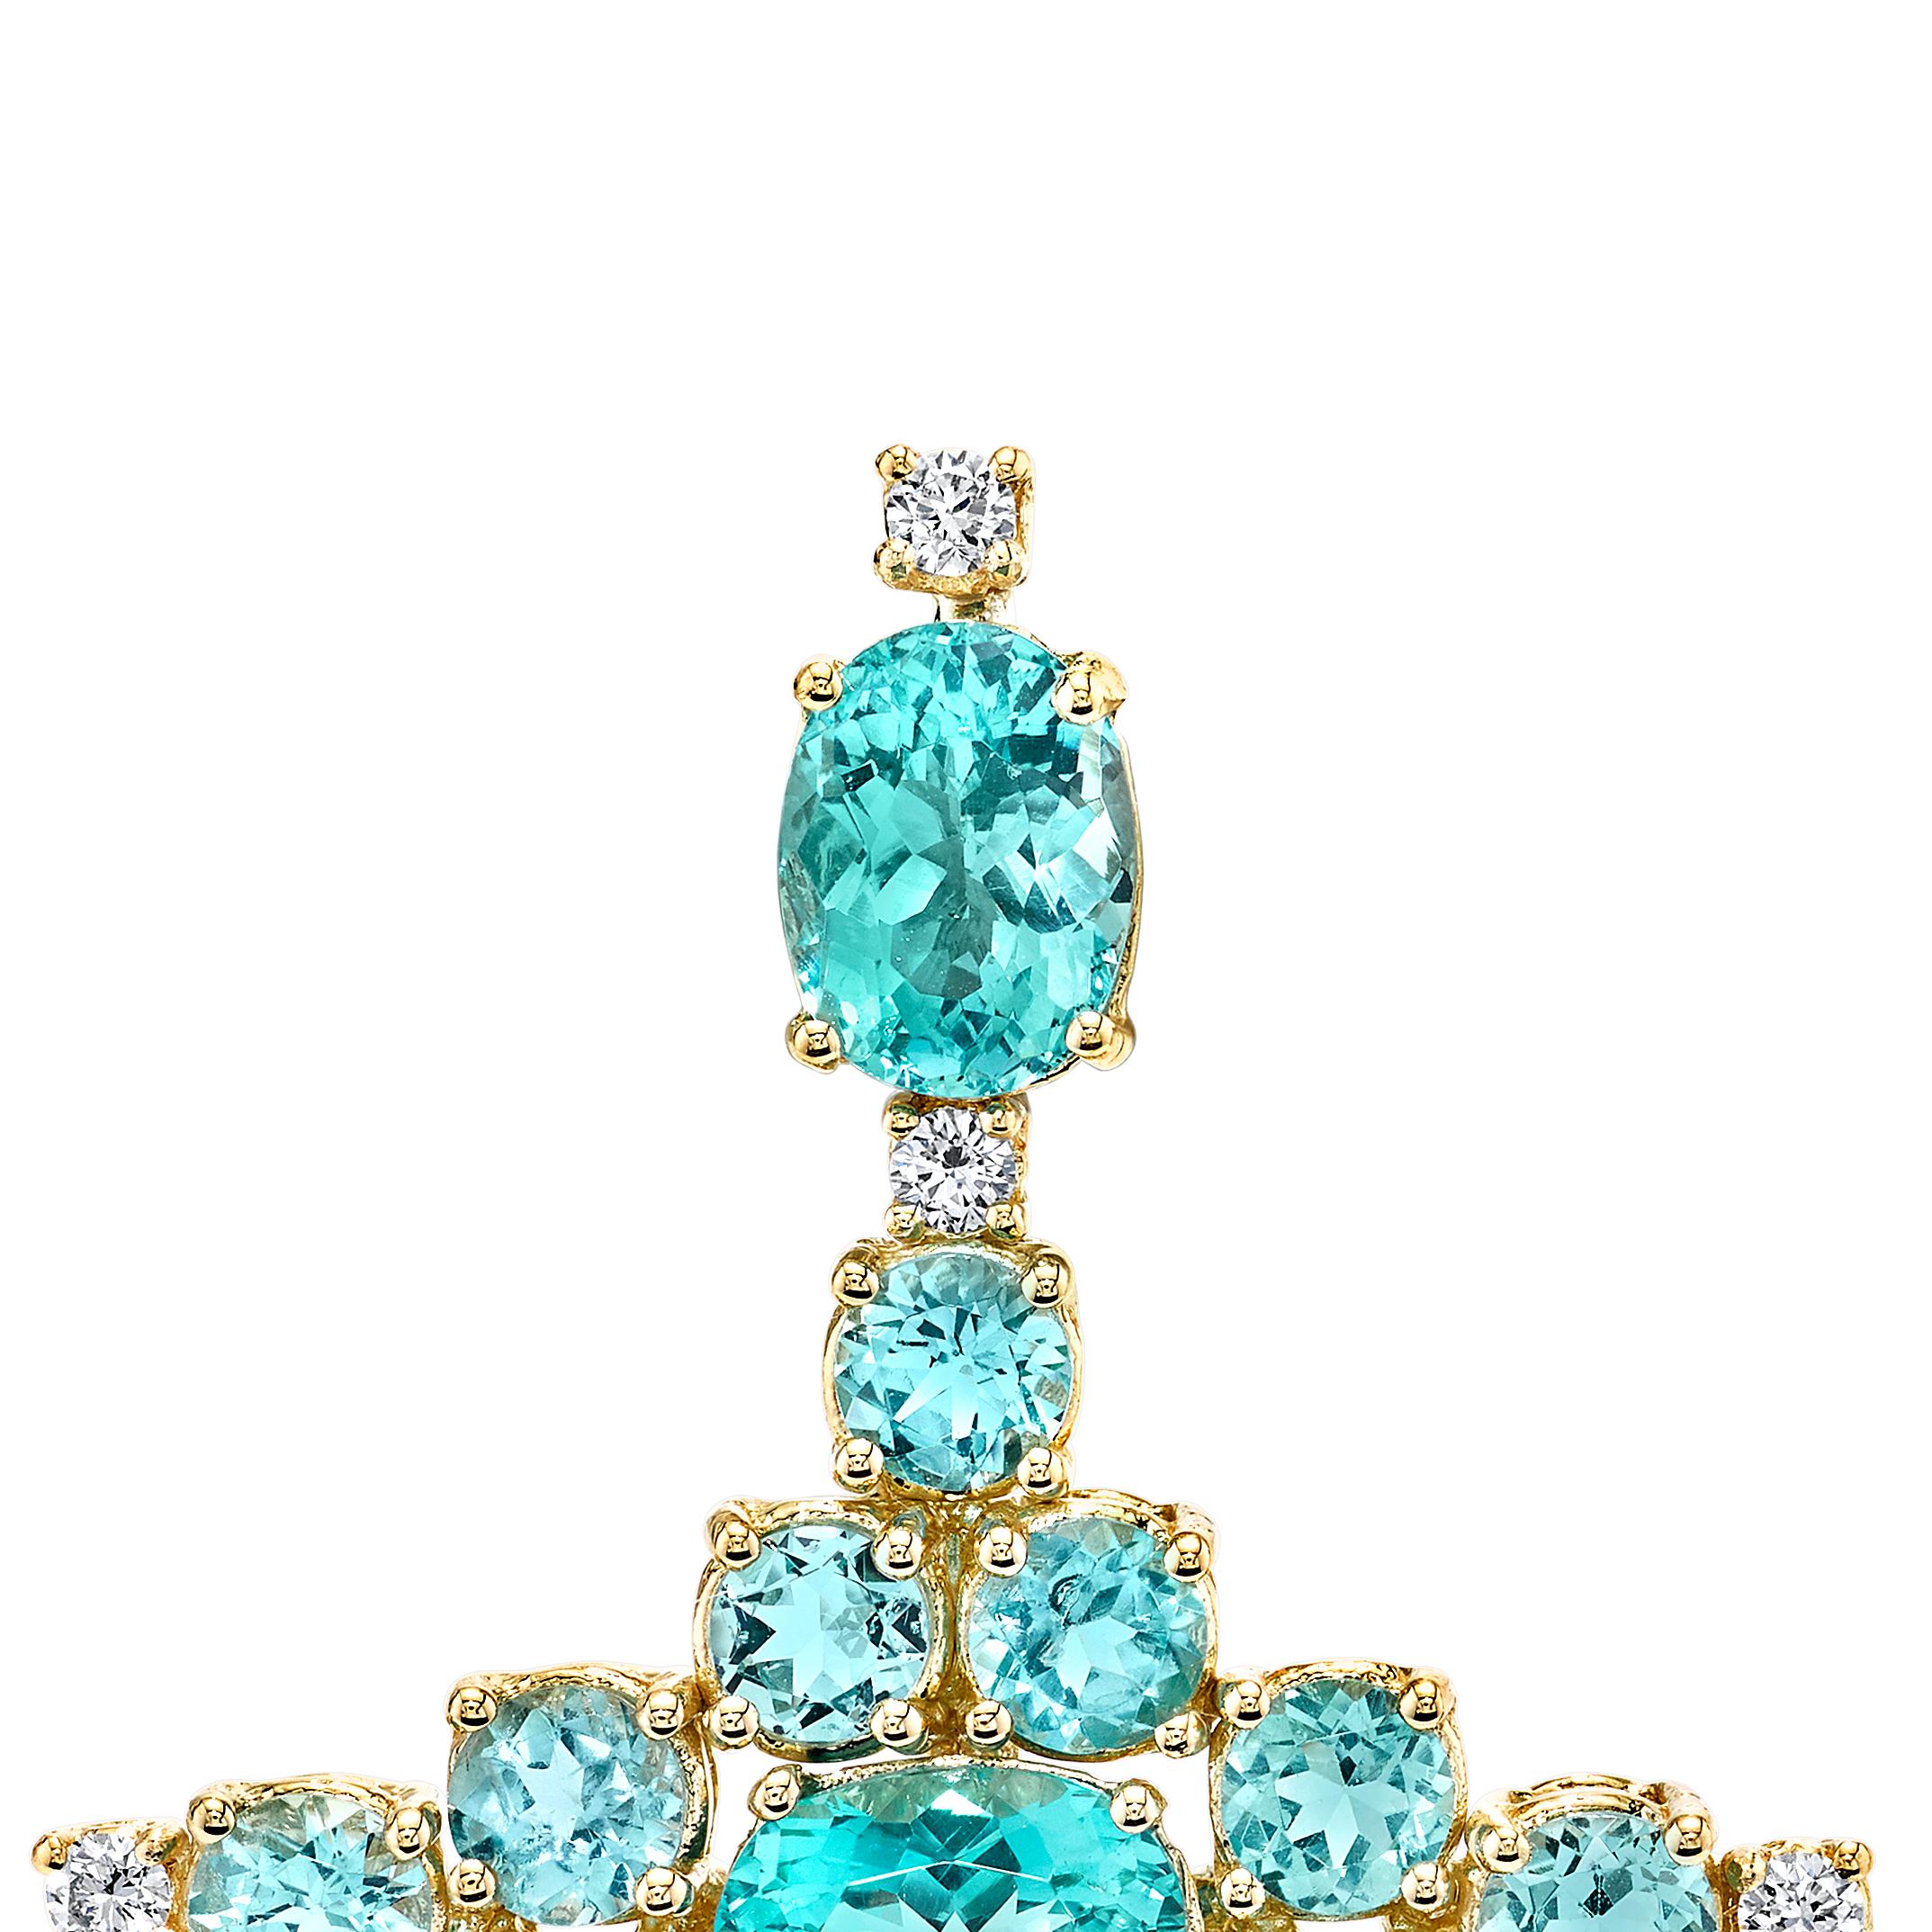 Glistening Aquatic Blues are celebrated in Karma El Khalil's 
Small Dew Earrings. Each earring is an elegant waterfall of Diamonds and Apatite, Custom-Cut stones set in 18K Yellow Gold.

Diamonds: 0.4cts & Apatite: 11.82cts
18k Gold: 14.92g 
From